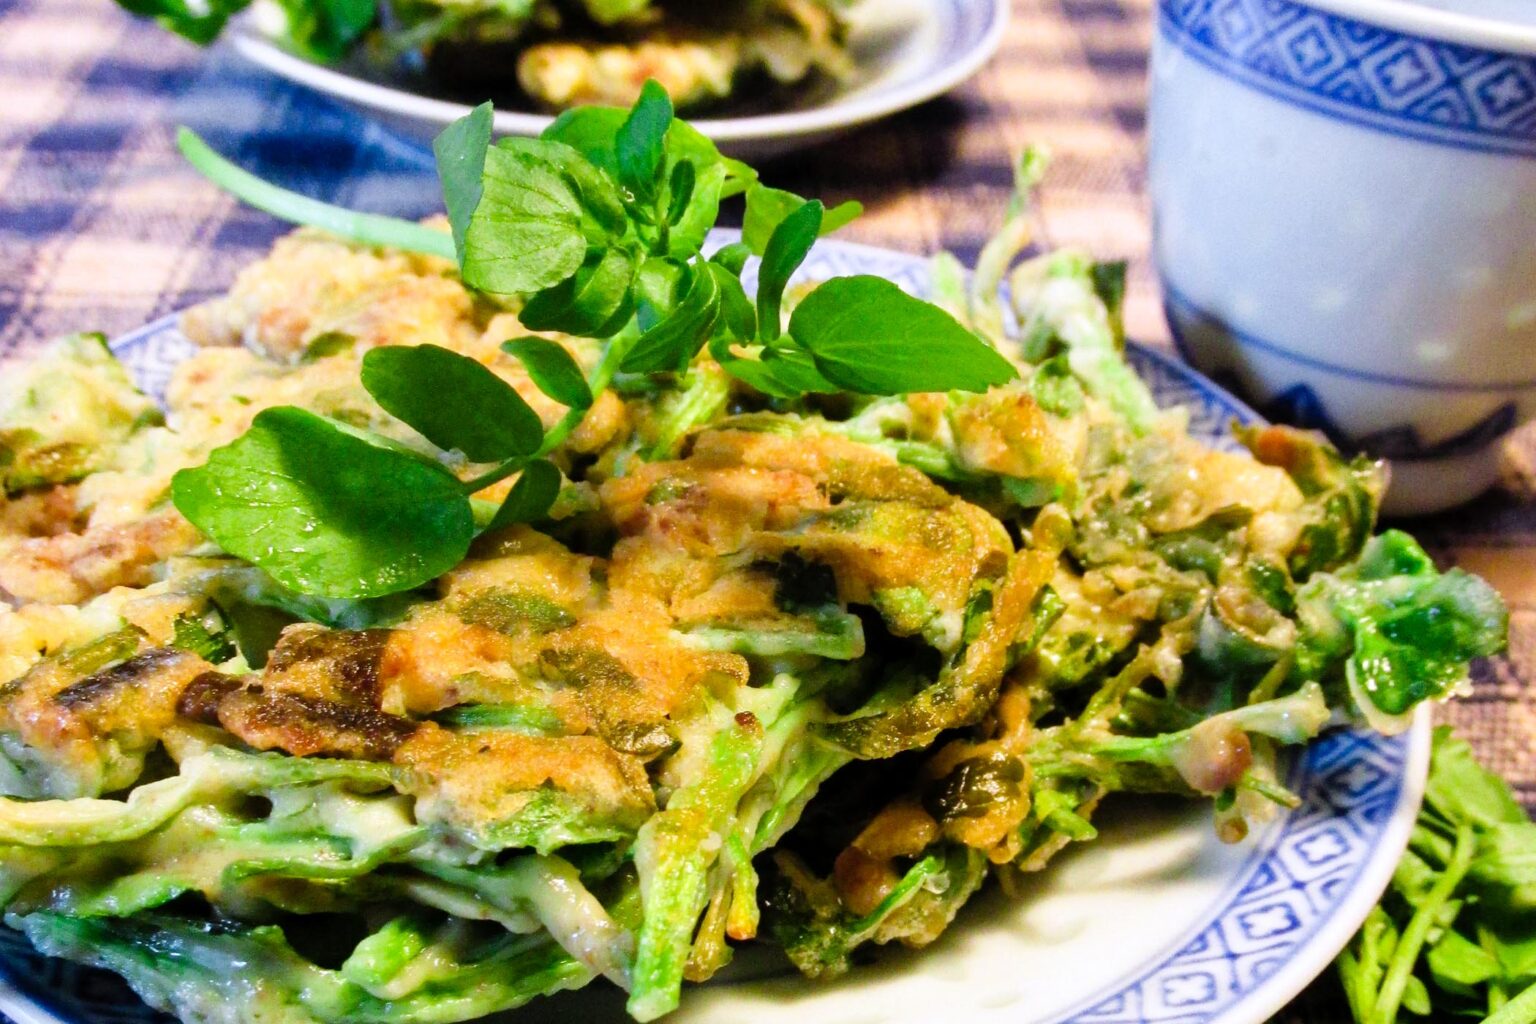 Watercress Dinner Pancakes Recipe - Kid-approved way to get greens and protein! Dairy-free, gluten-free optional